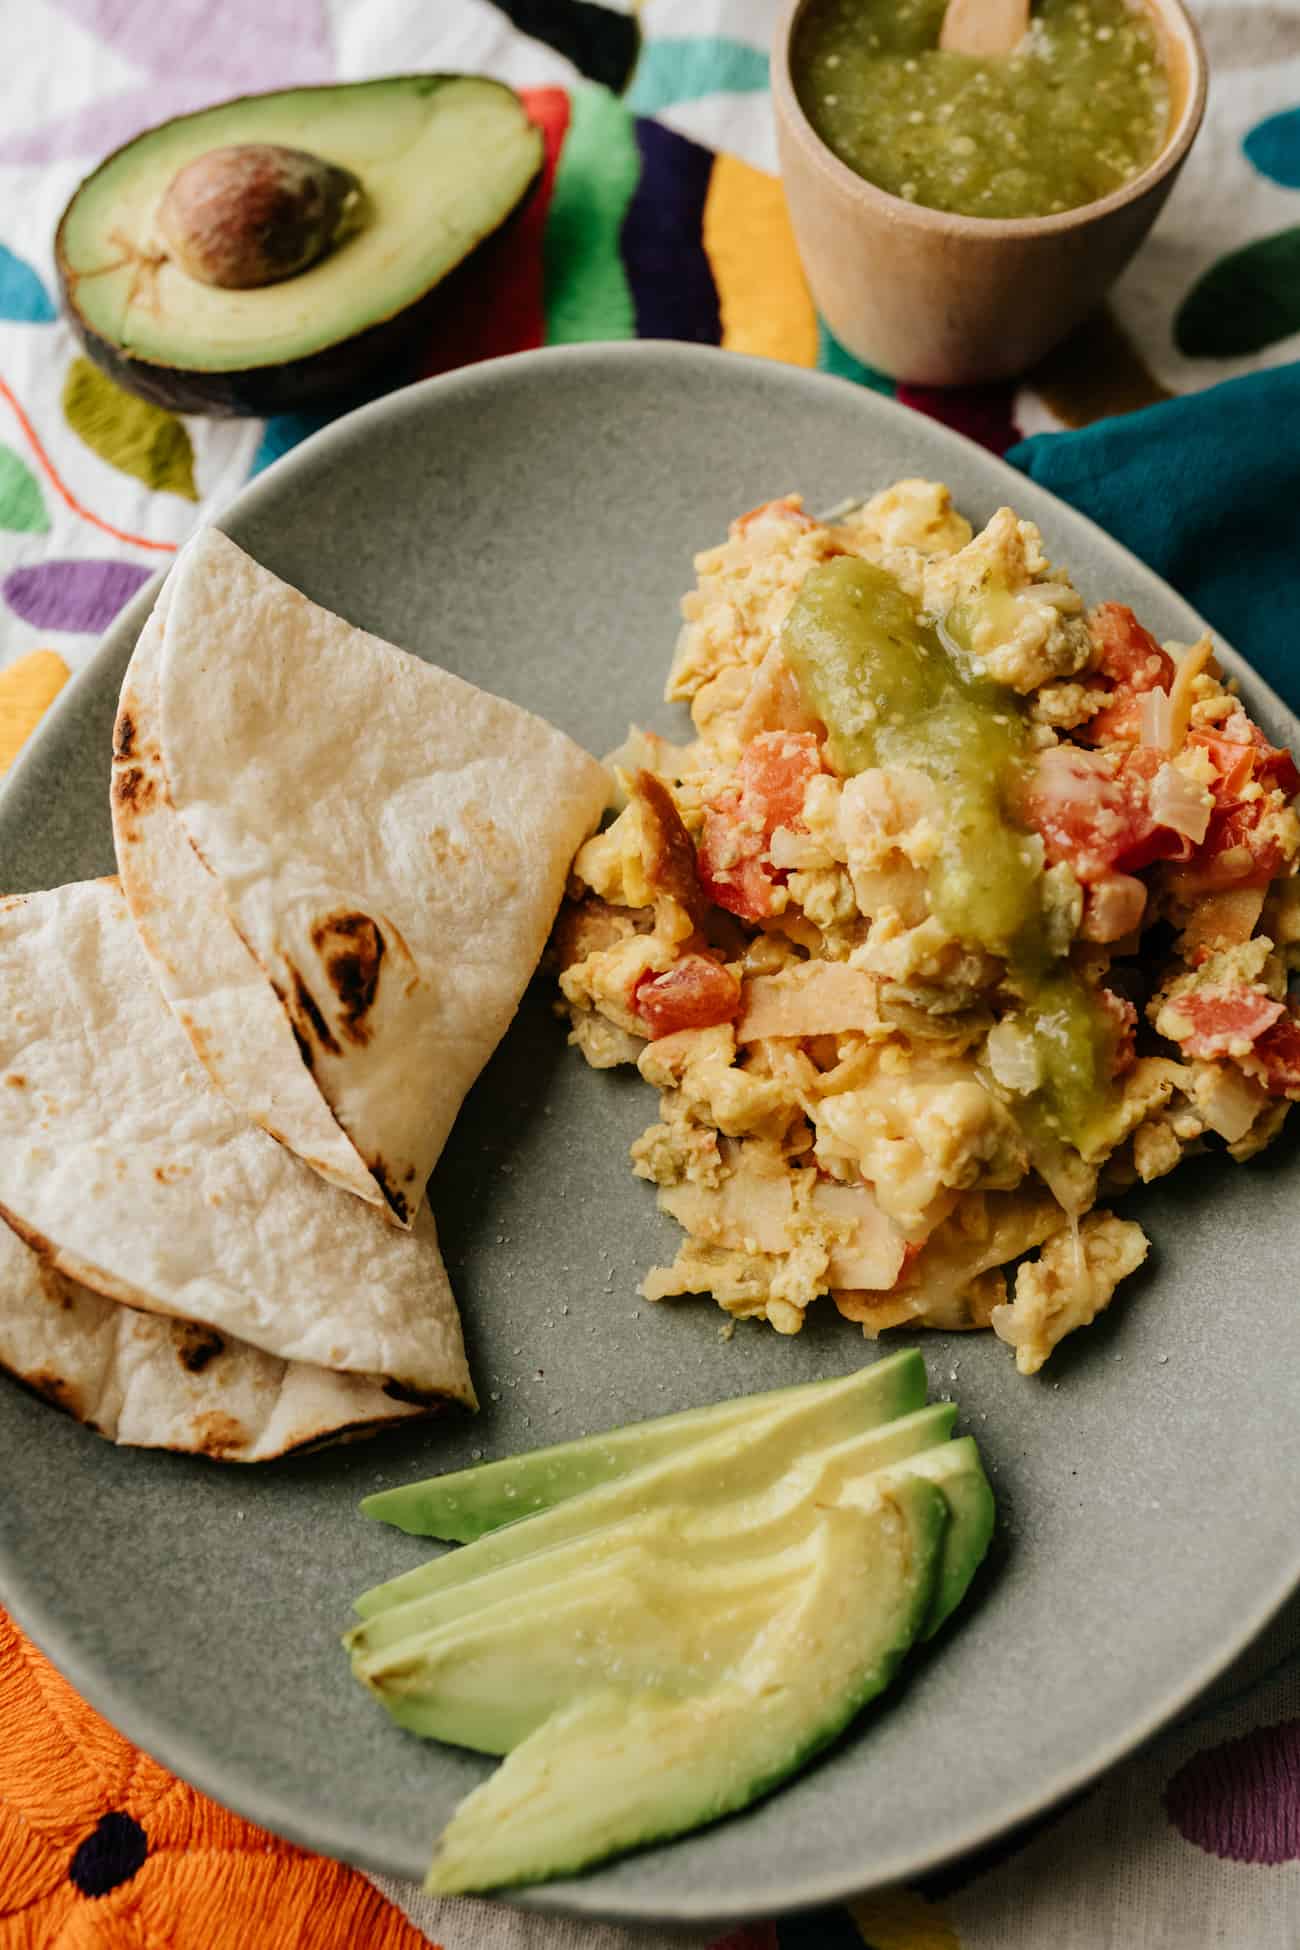 migas with a side of flour tortillas for making breakfast tacos on a gray round plate with slices of avocado and a side of salsa verde.